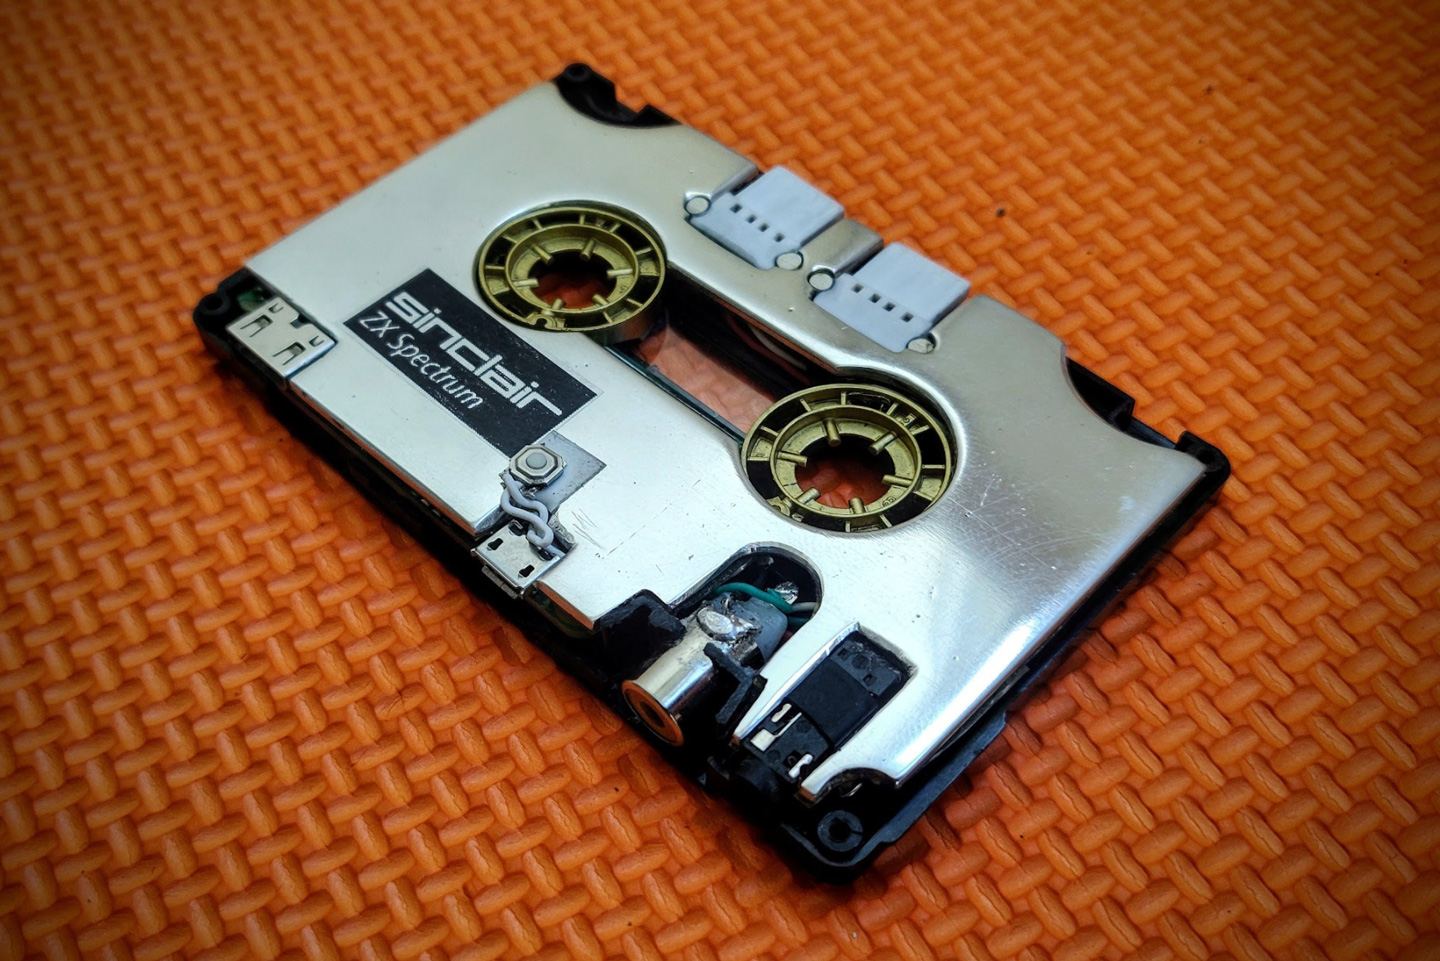 Someone managed to fit an entire Raspberry Pi computer inside the body of a cassette